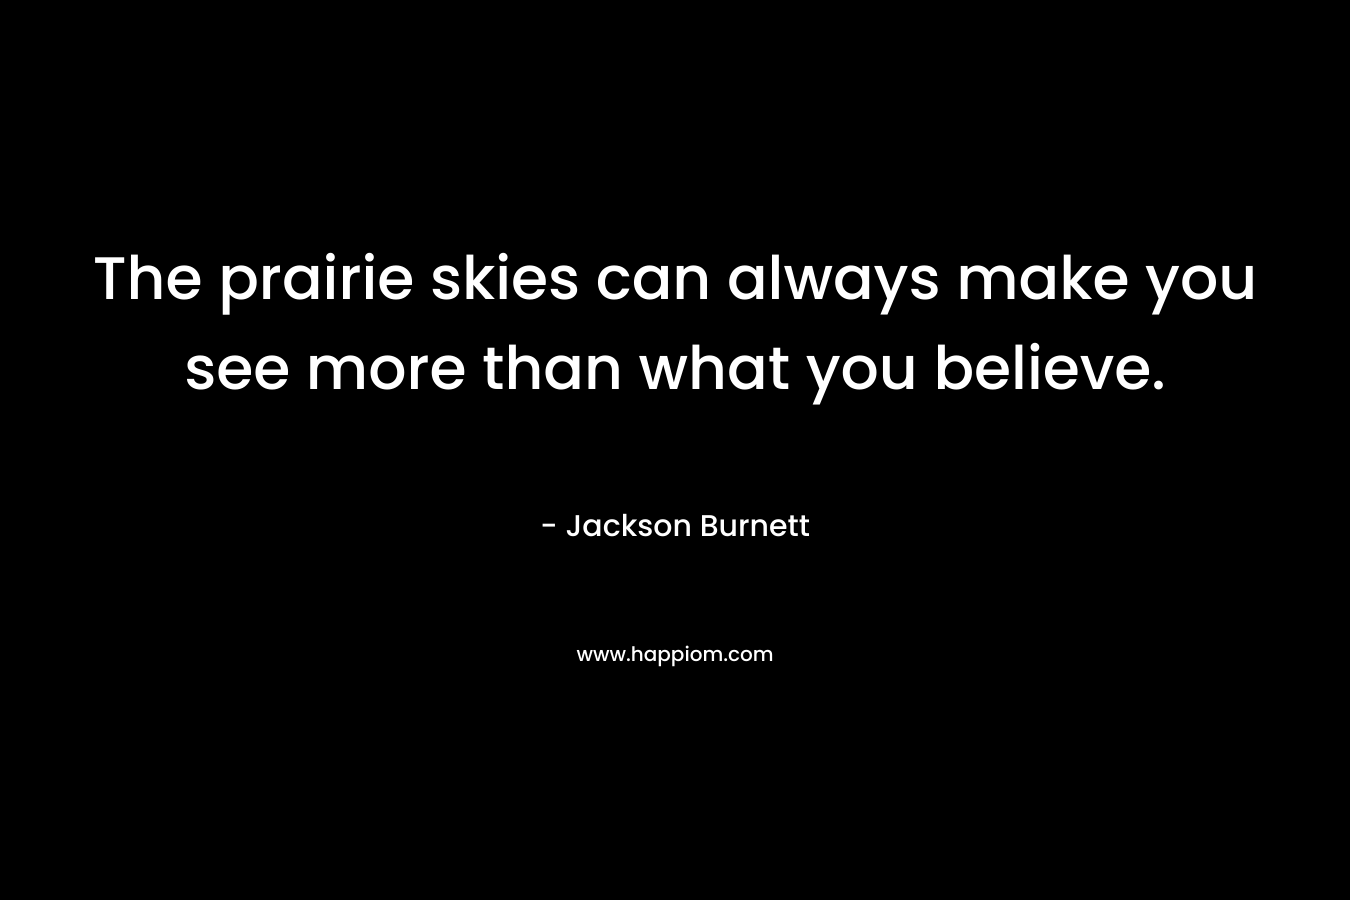 The prairie skies can always make you see more than what you believe. – Jackson Burnett